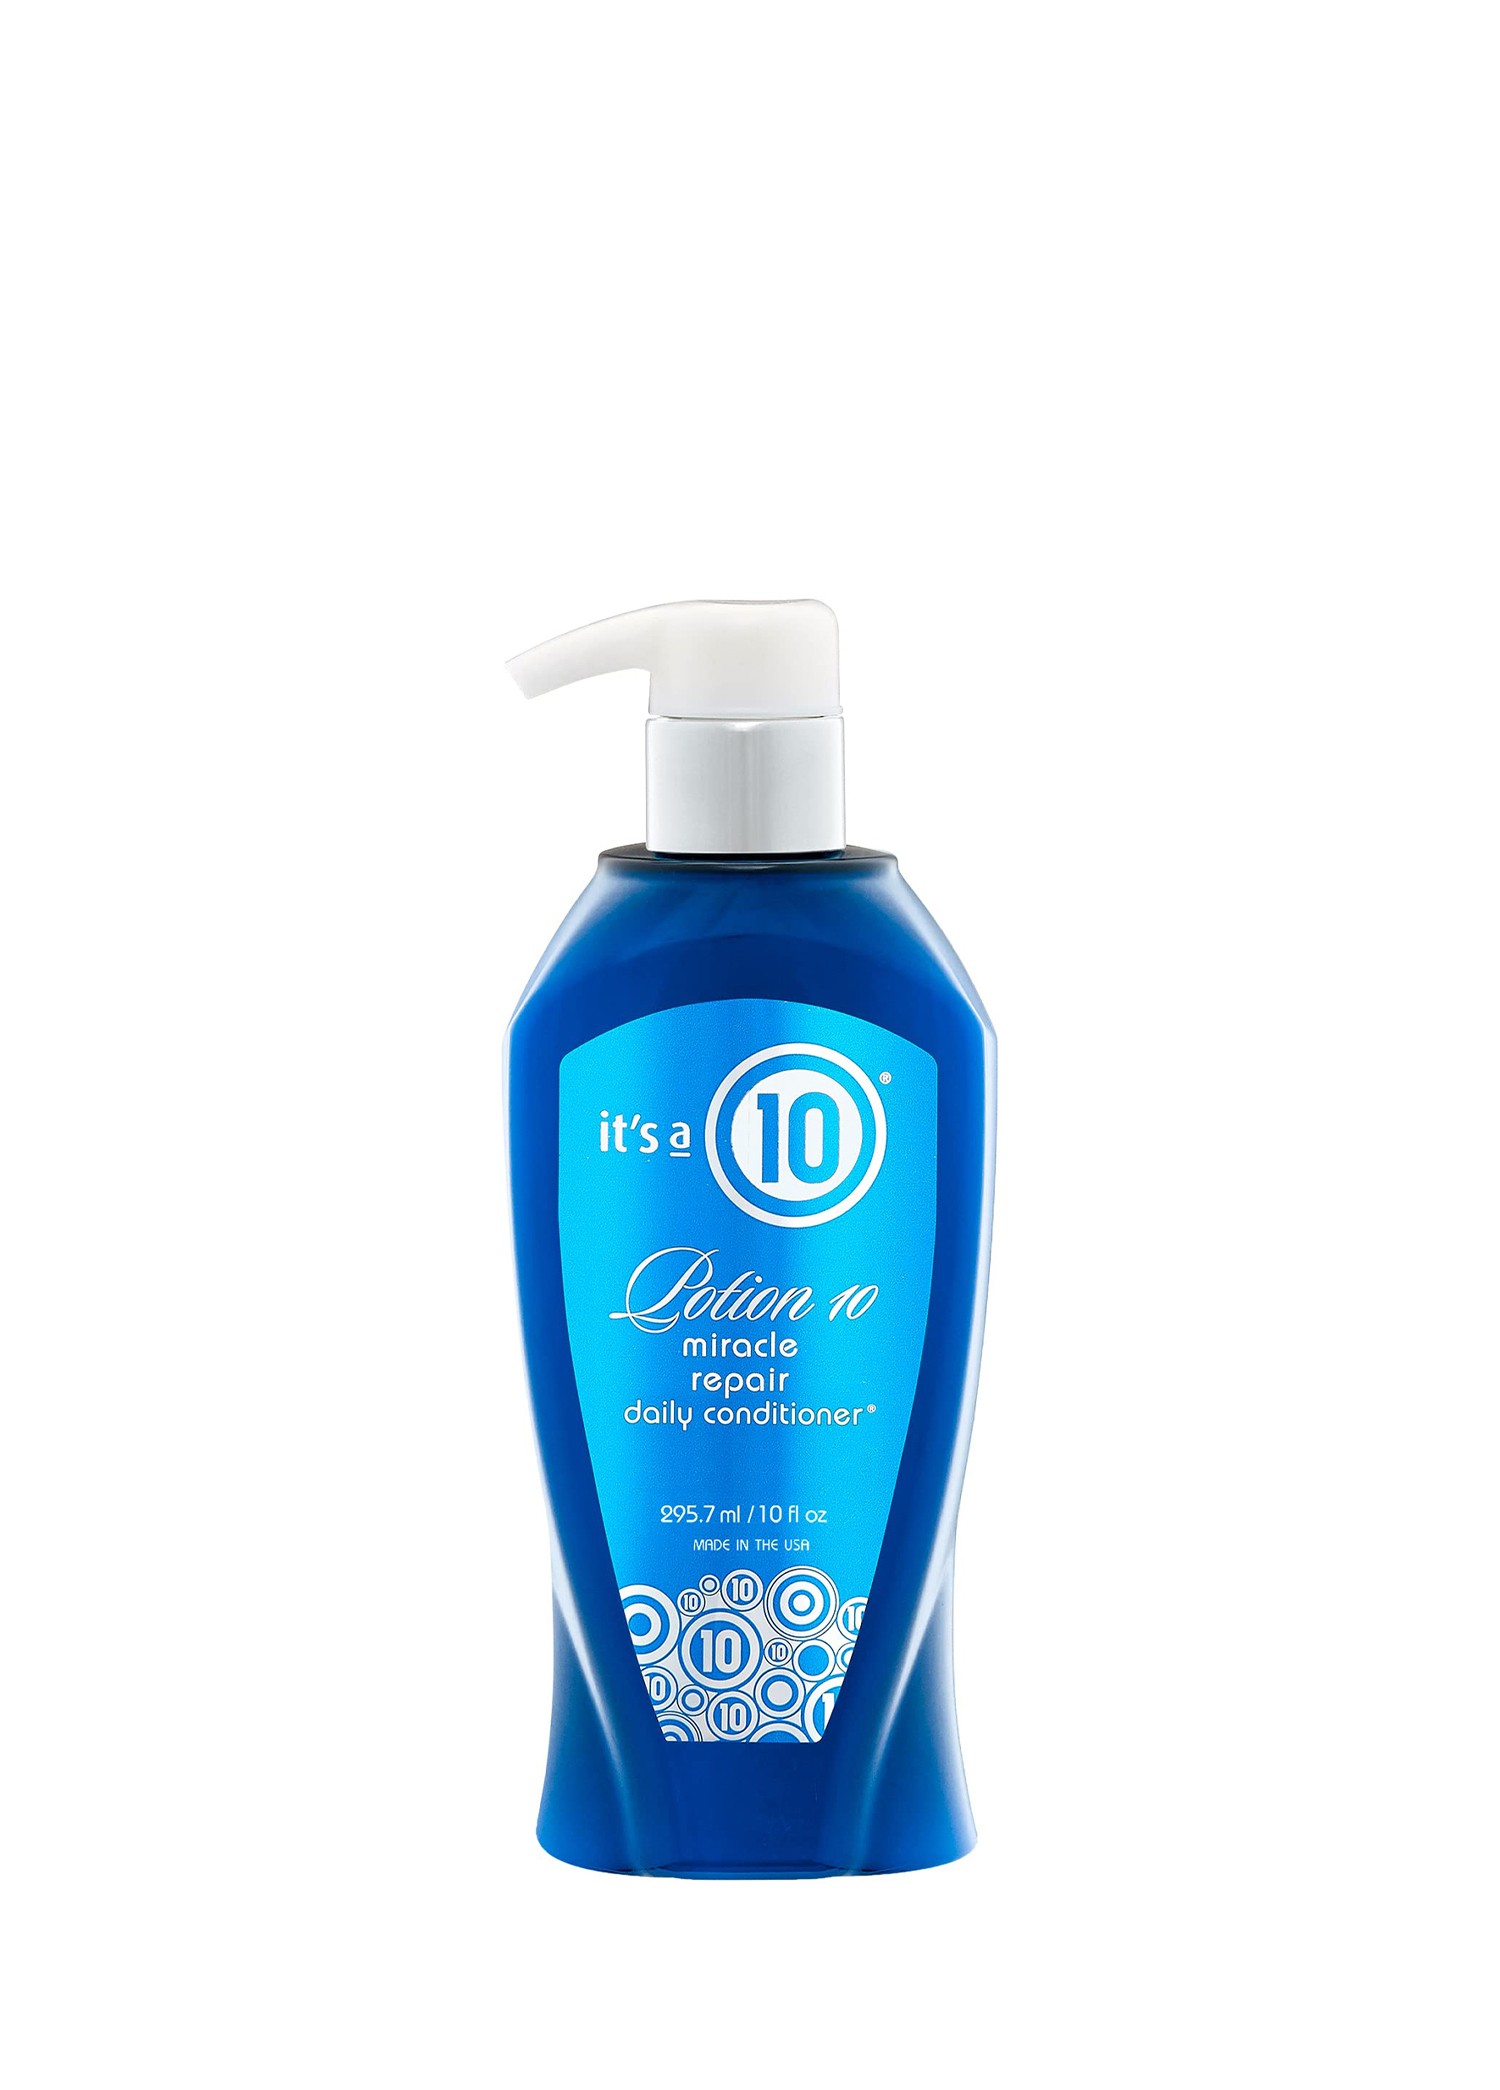 Potion 10 Miracle Repair Daily Conditioner 295.7 ml